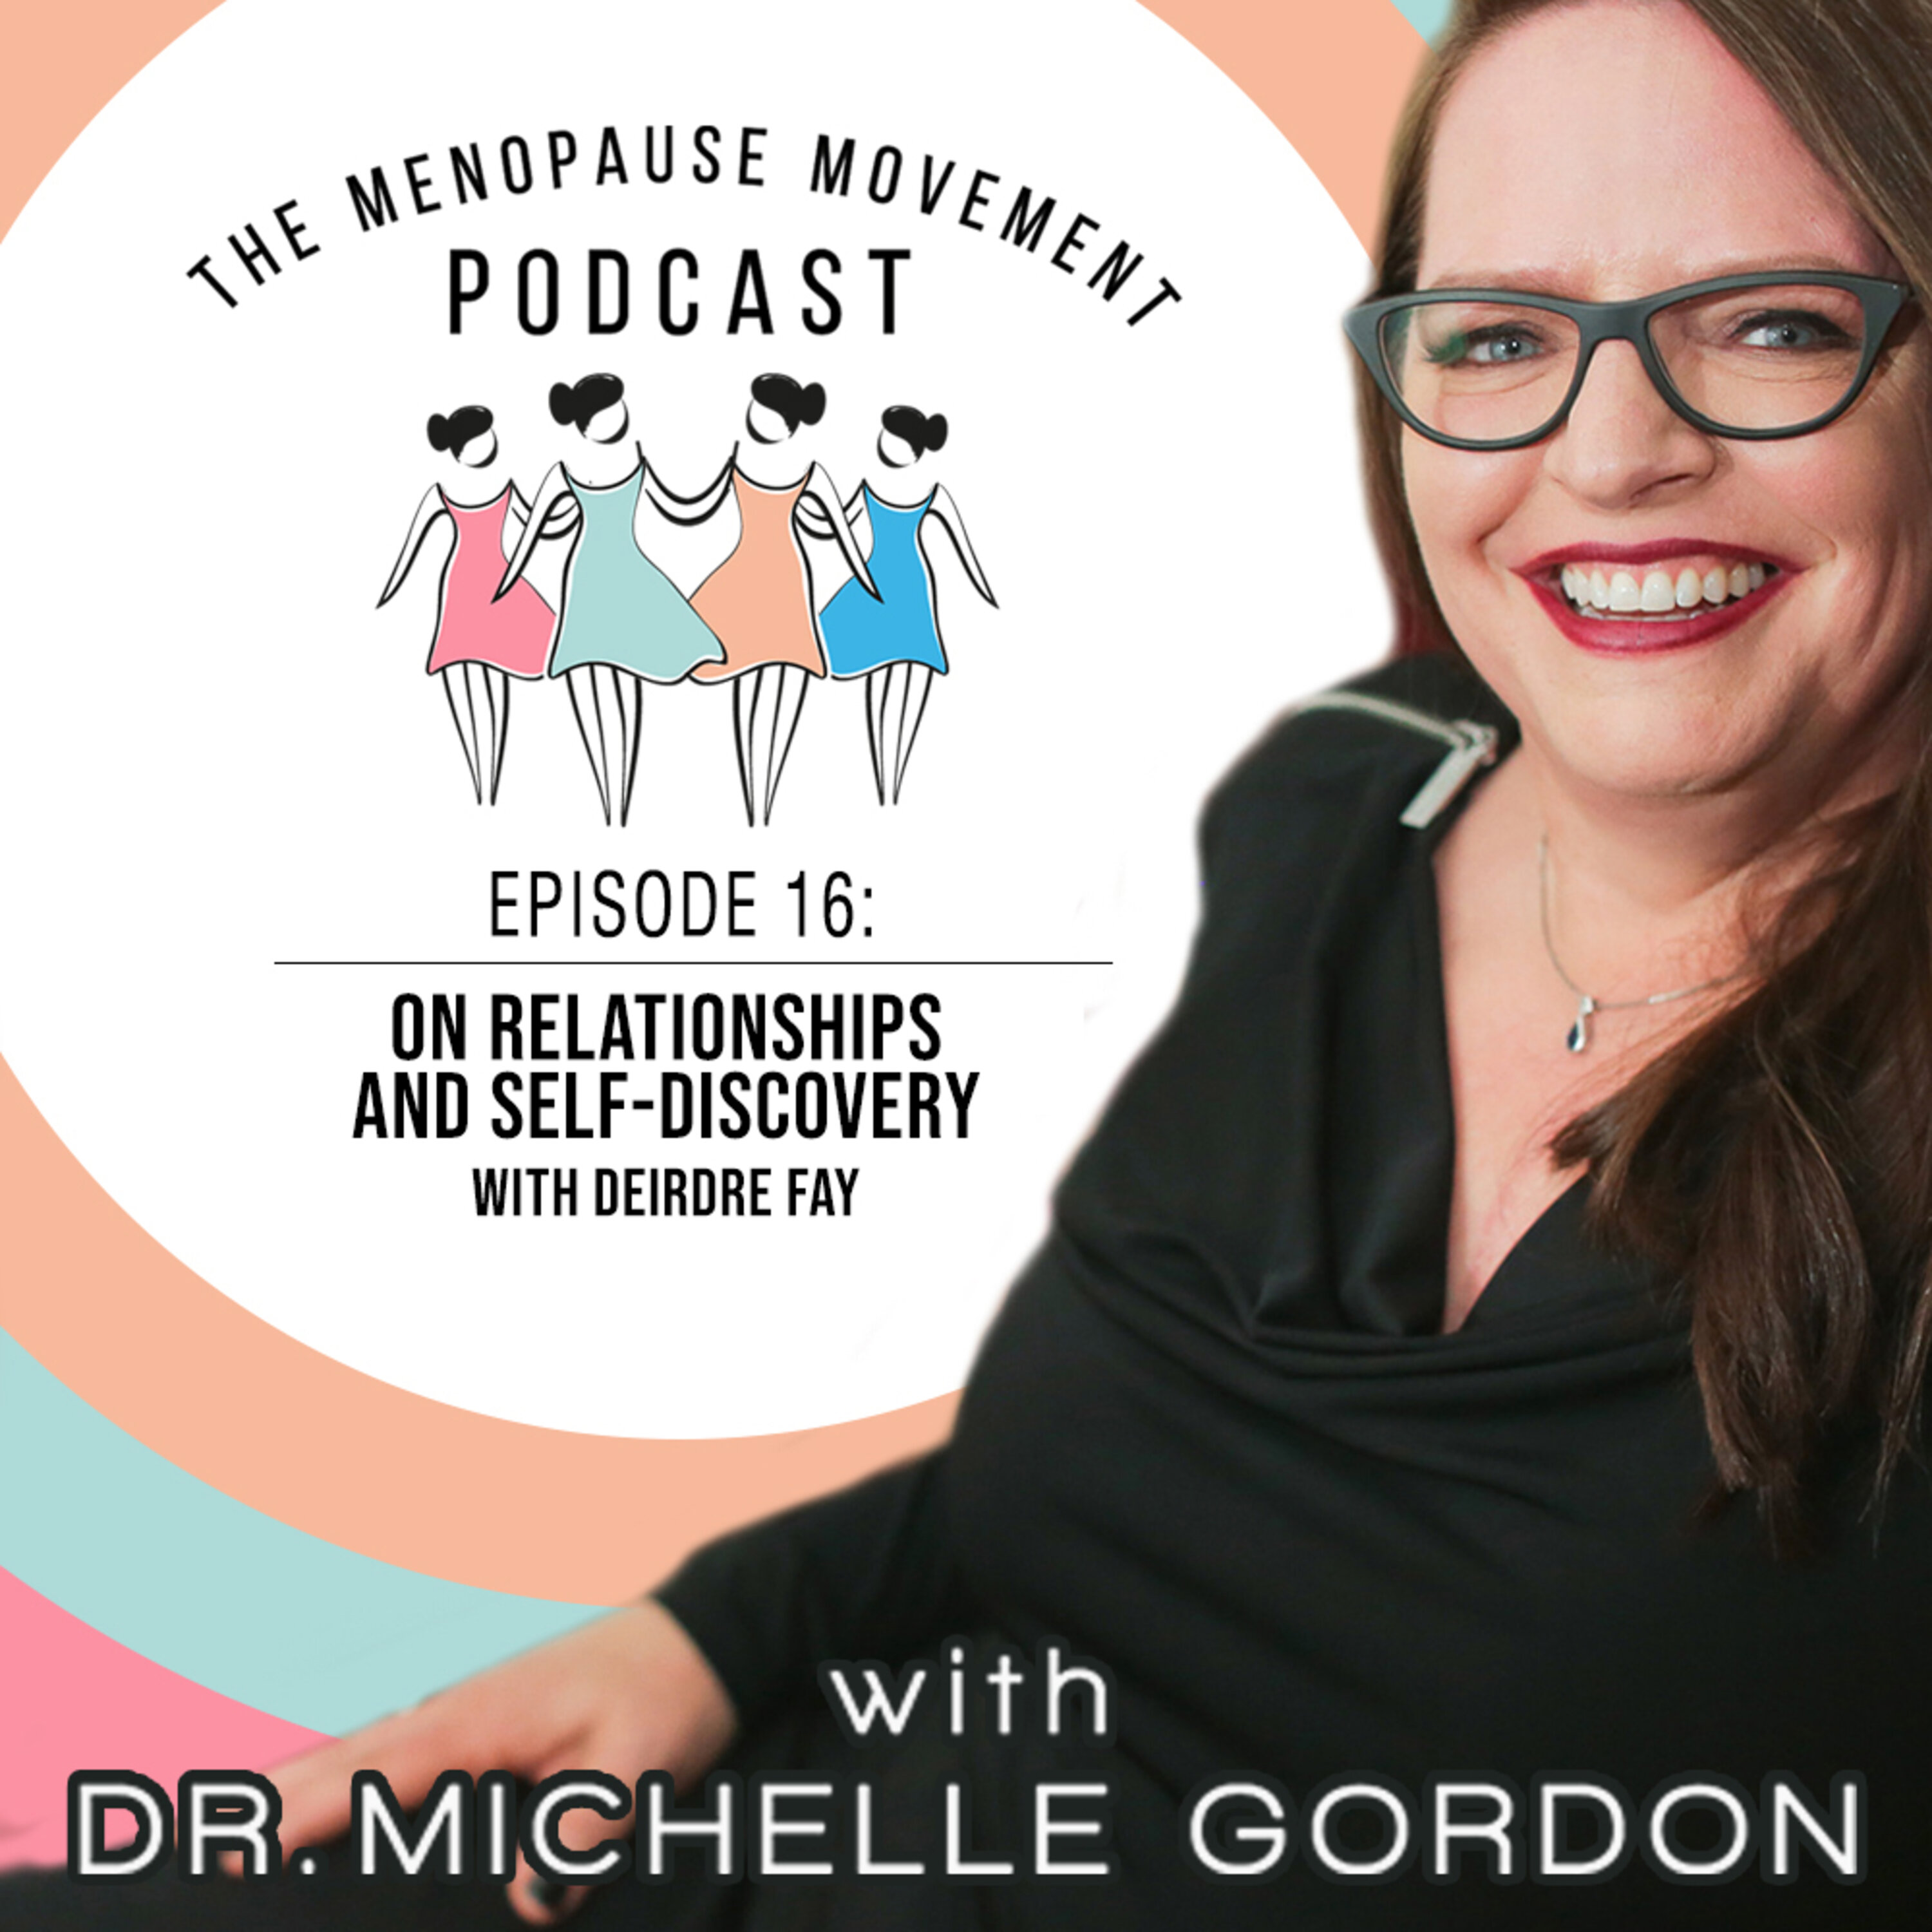 On Relationships and Self-Discovery with Deirdre Fay